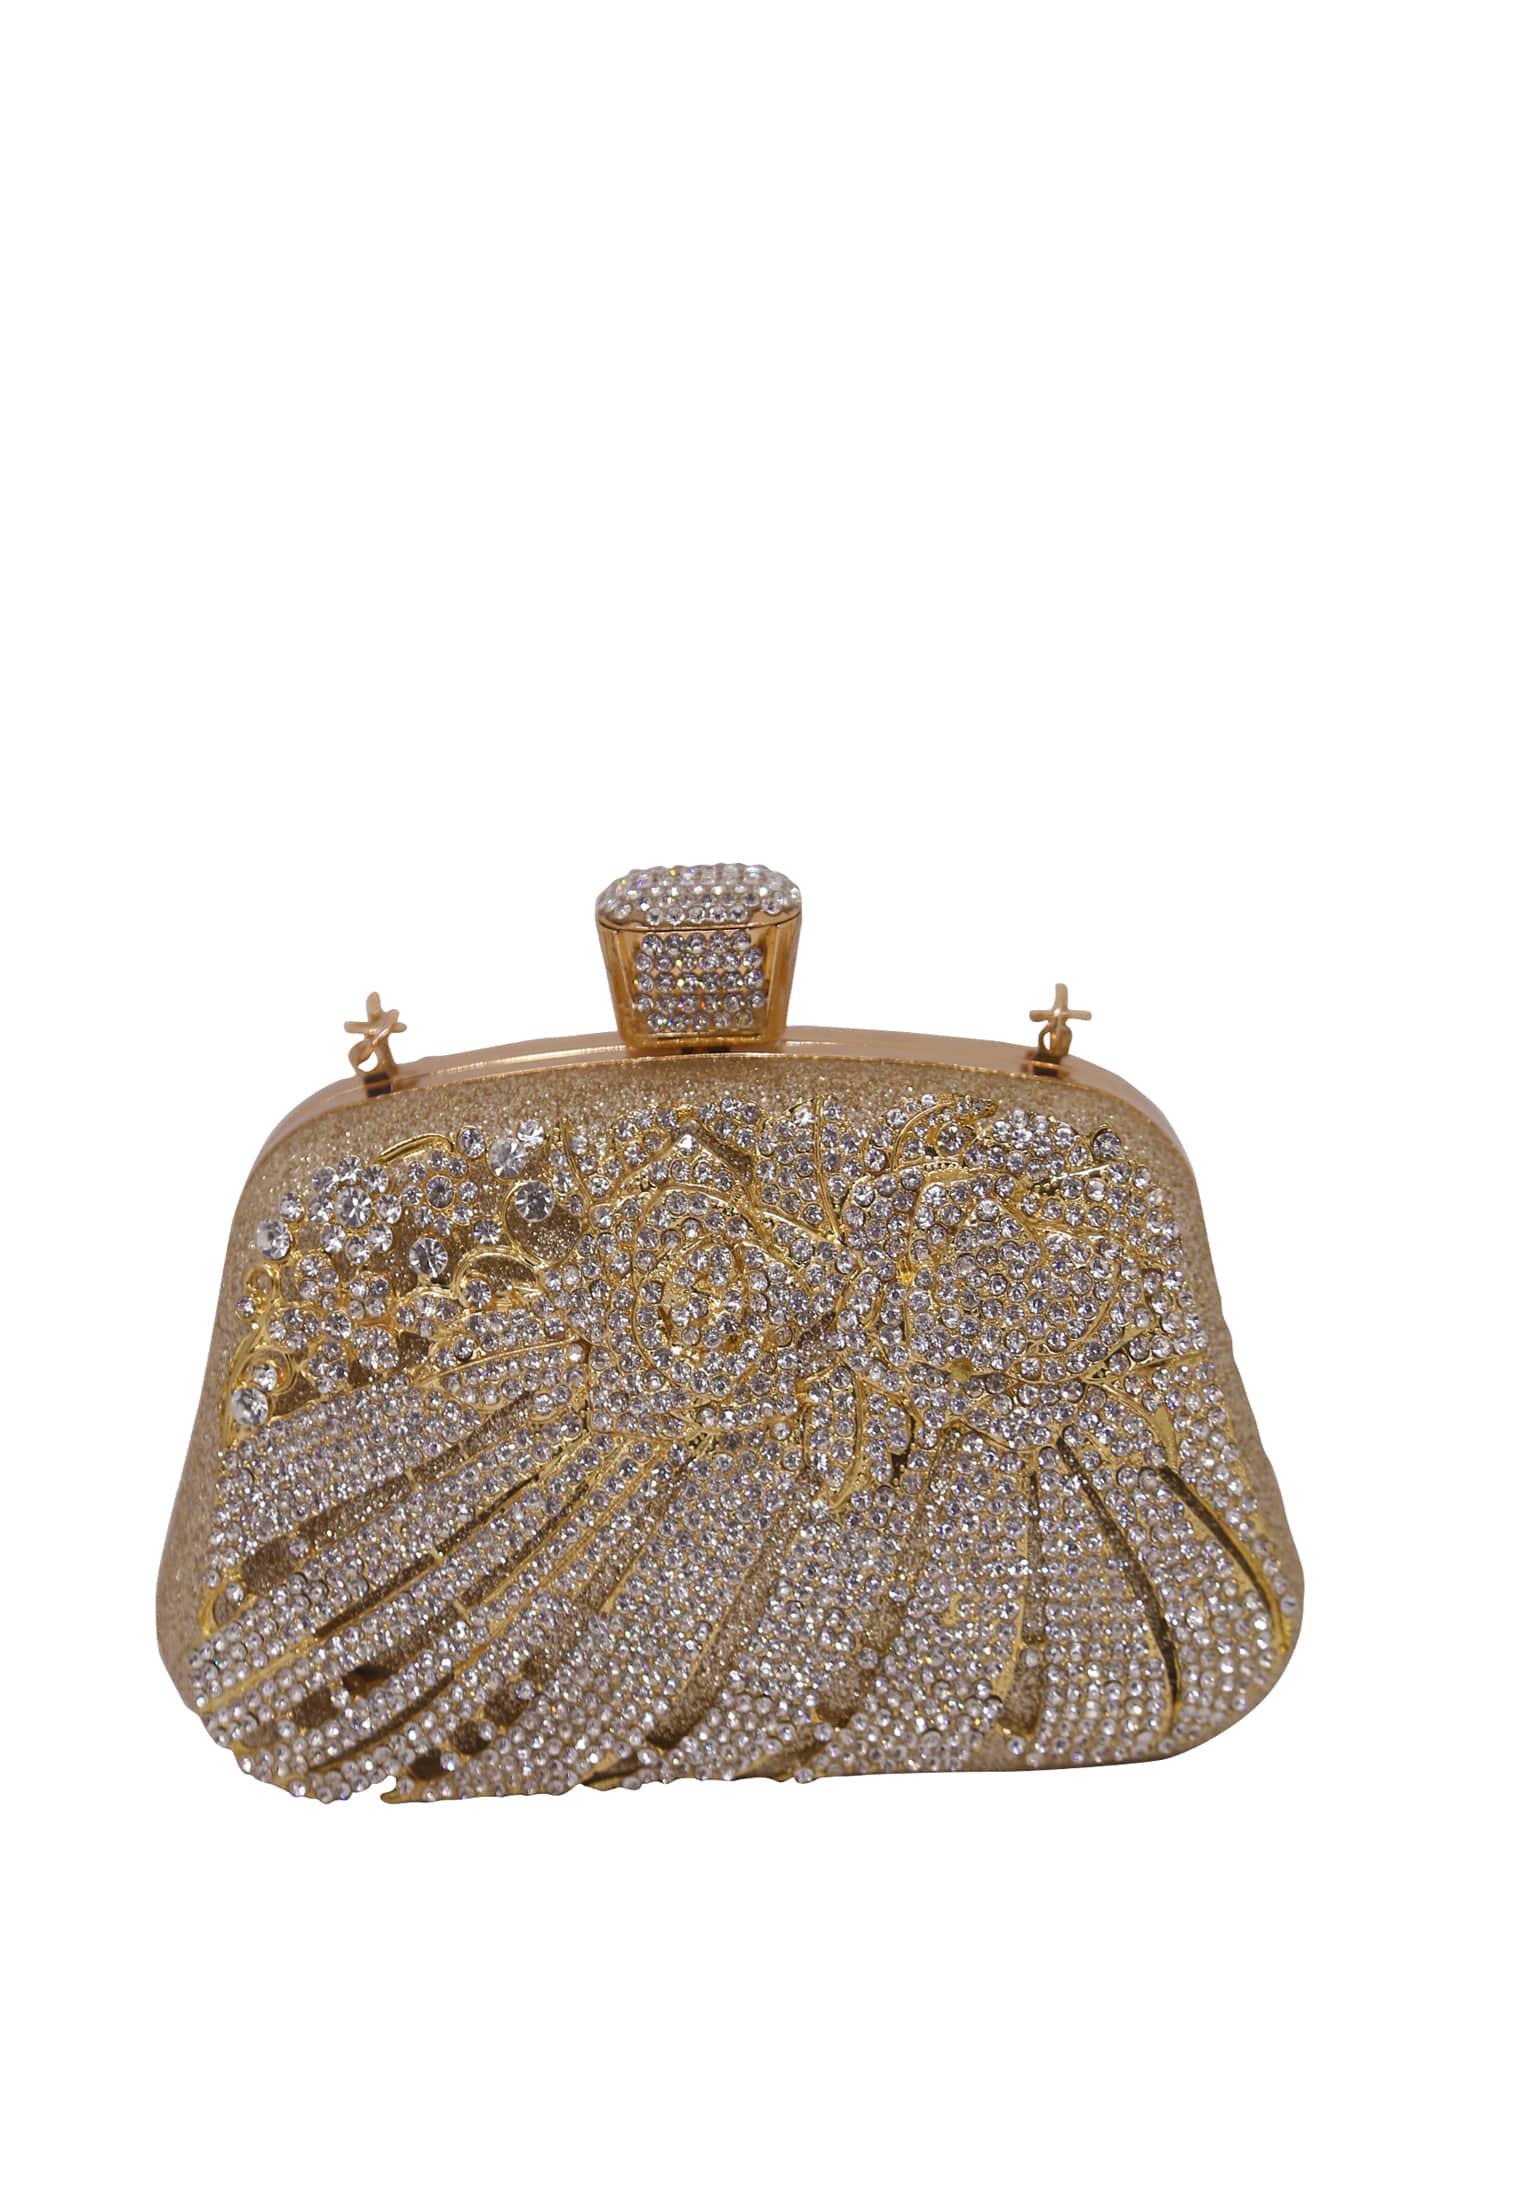 Latest collection of #bridal clutches and hand #purse 2020| fashion trends  | Fancy purses, Fancy clutch, Bridal clutch bag